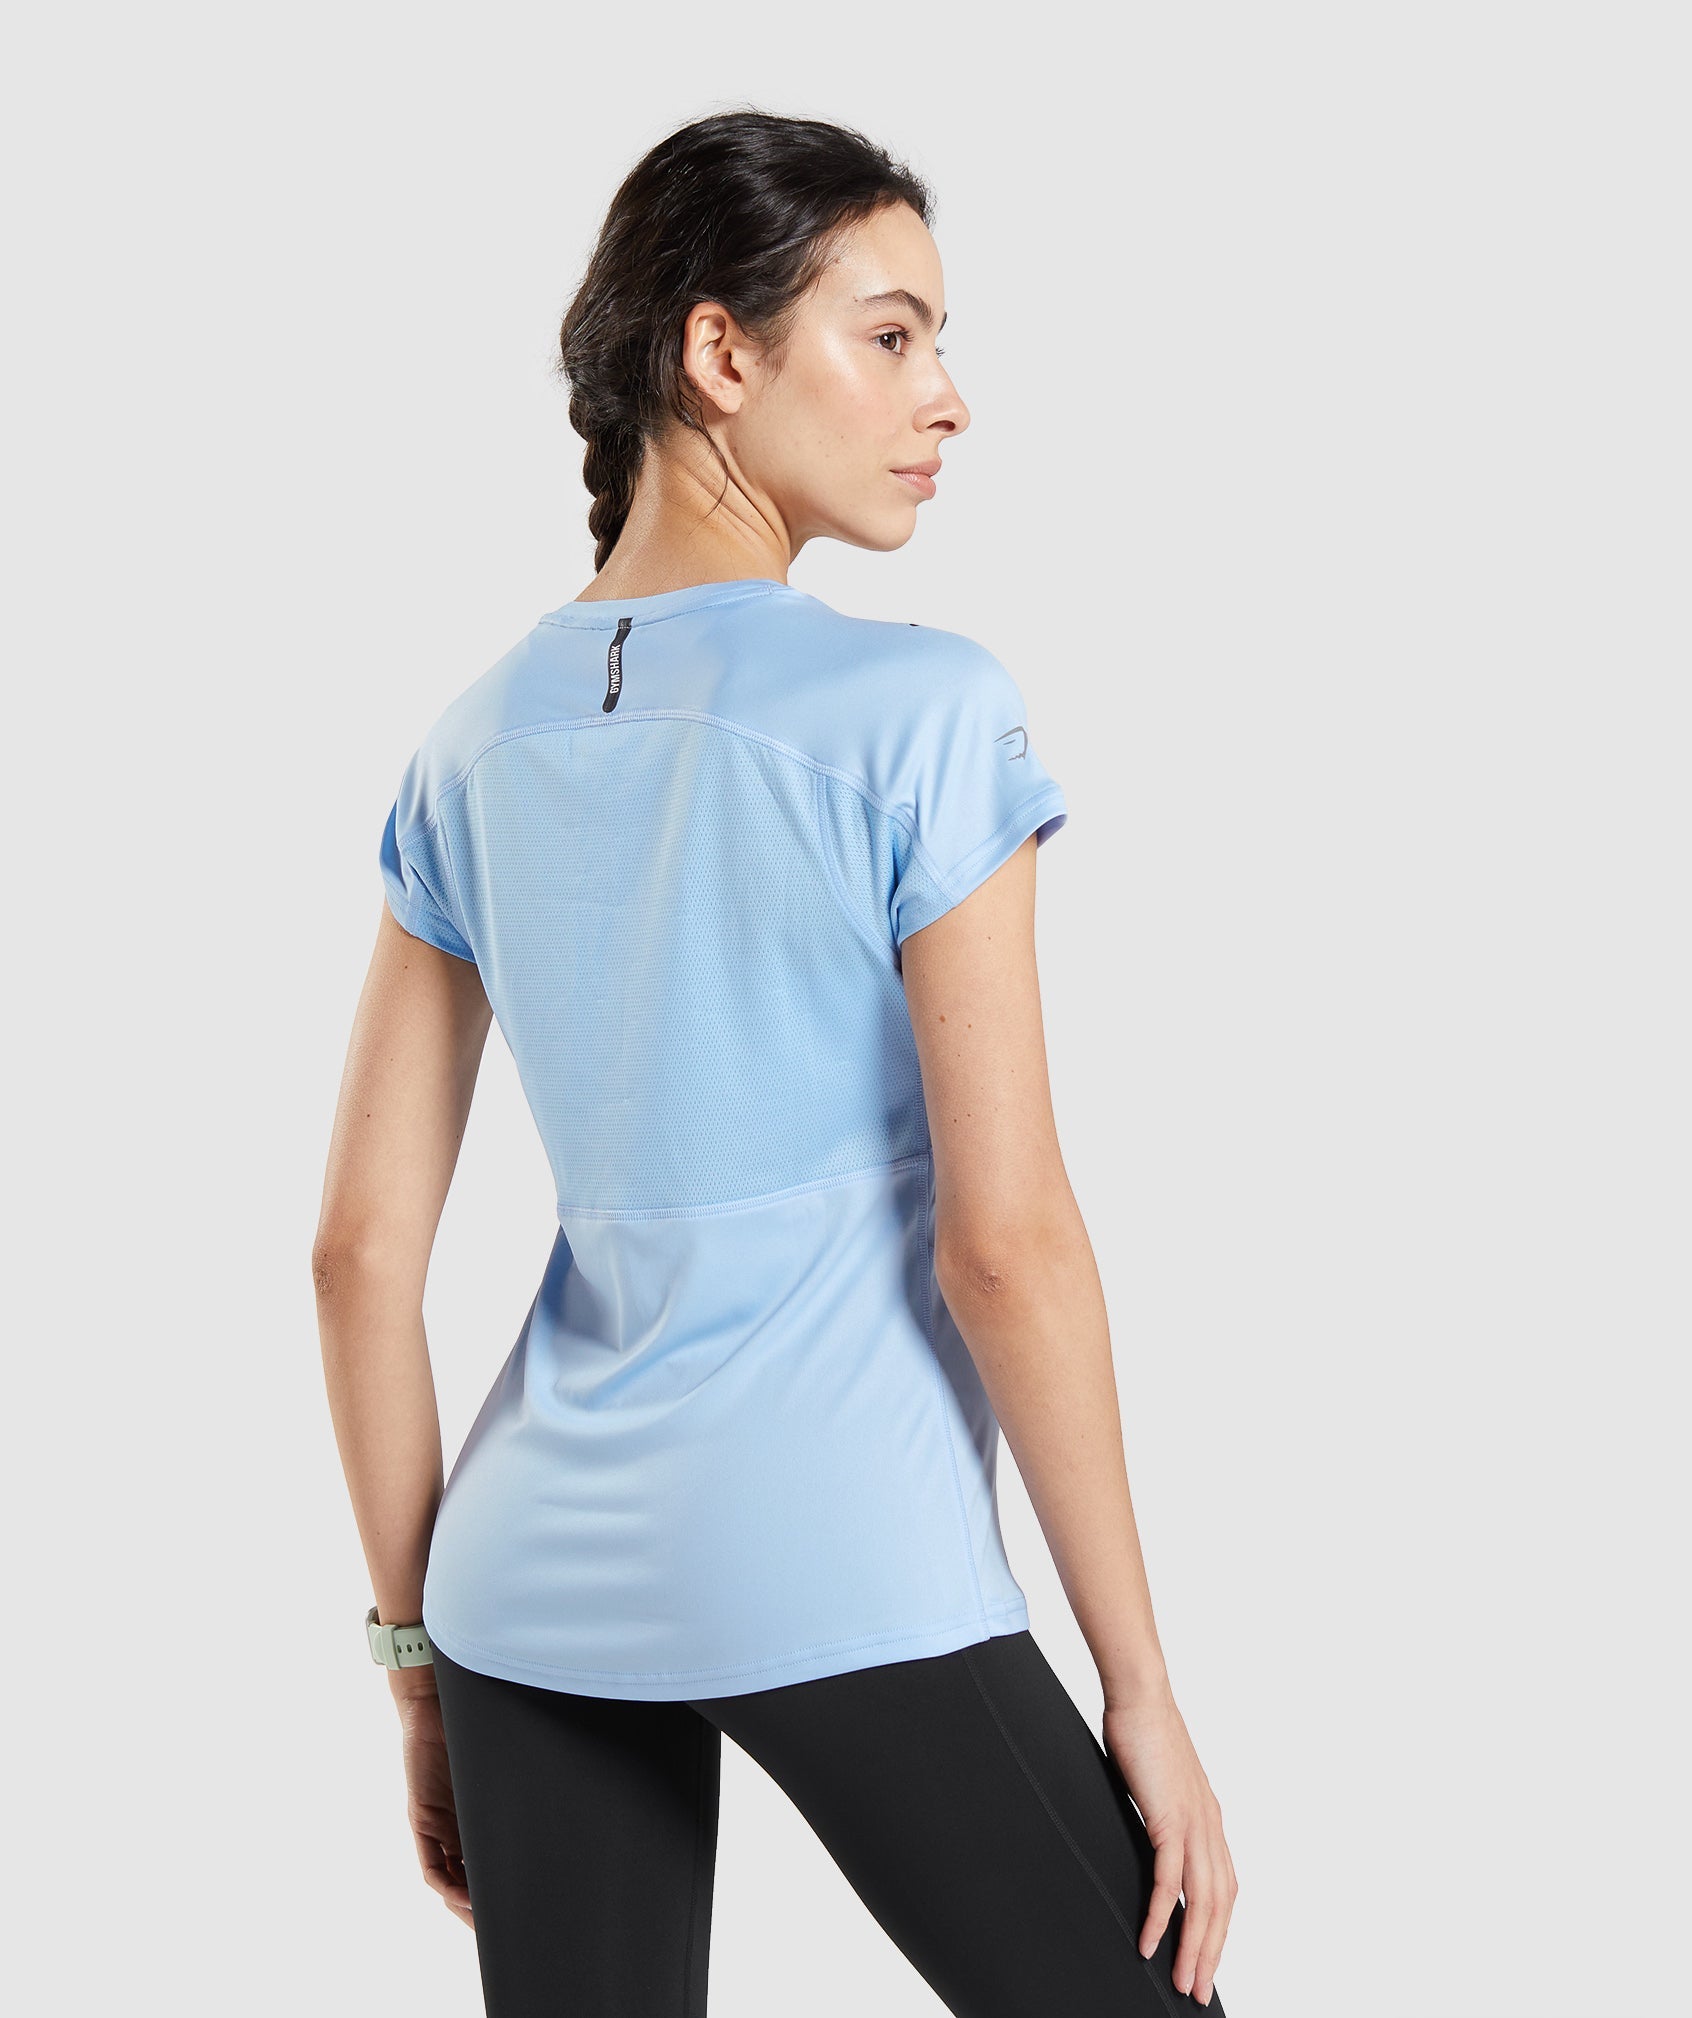 Speed T-Shirt in Moonstone Blue - view 2